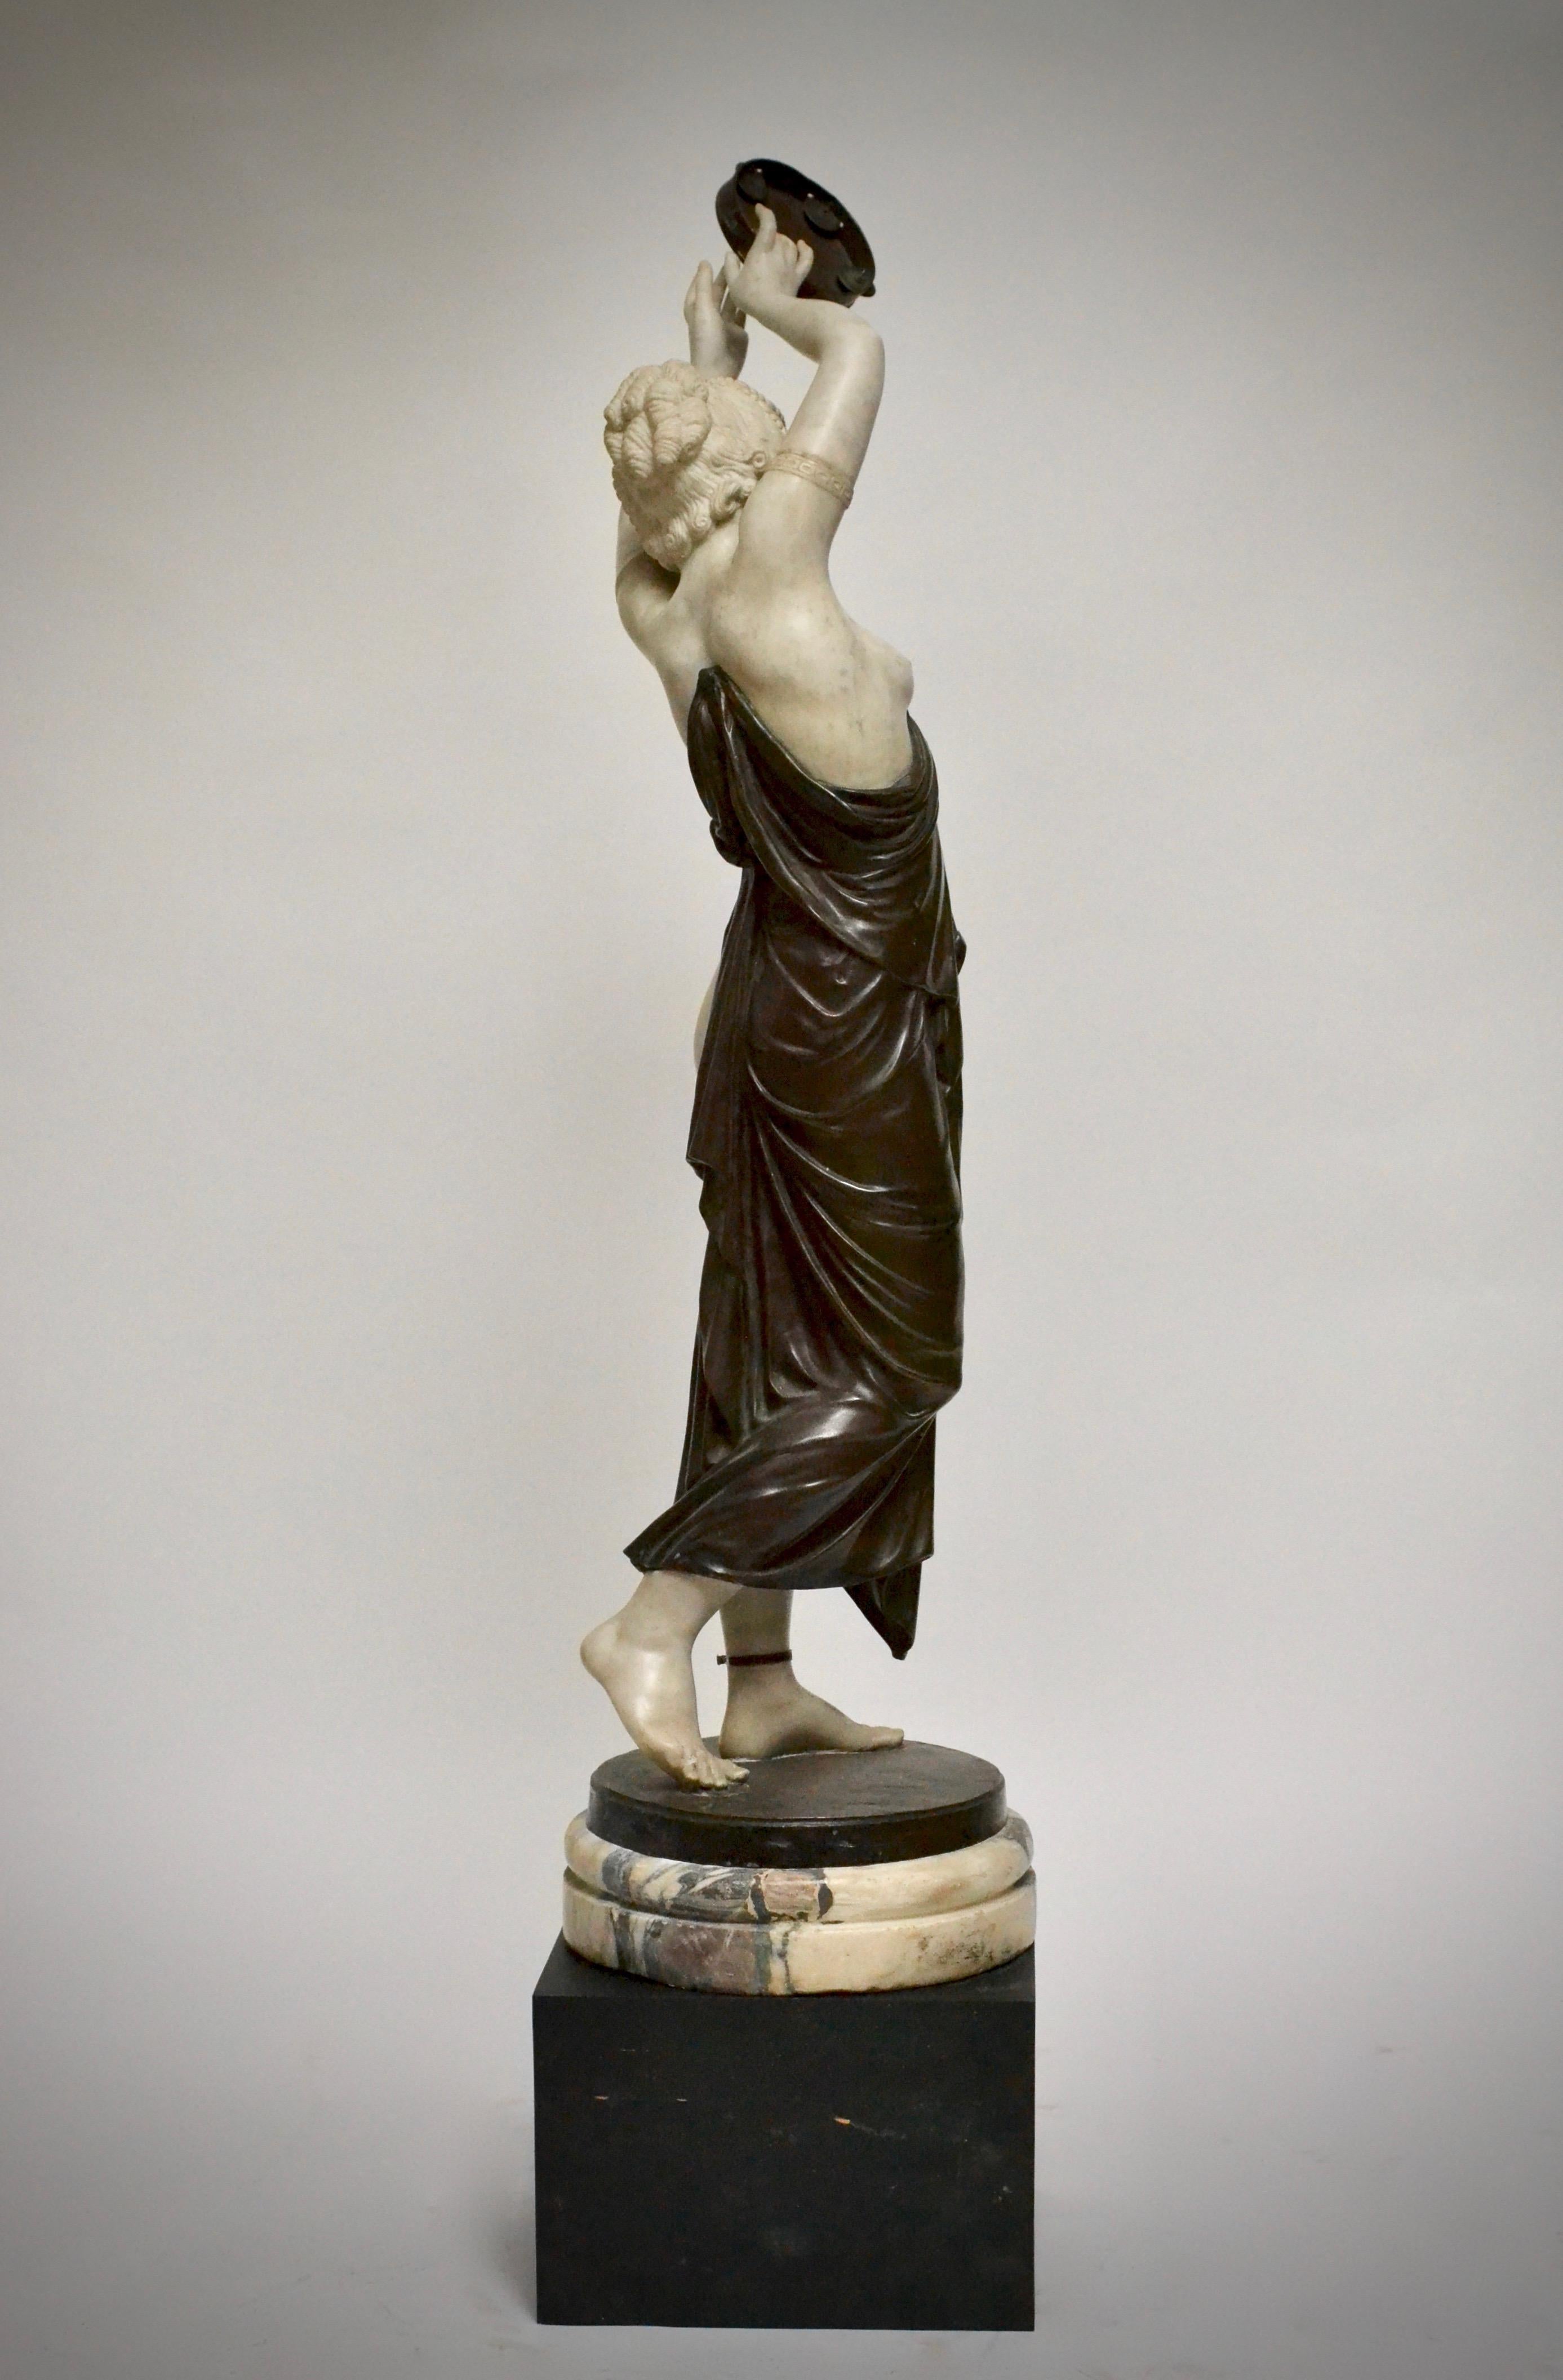 19th Century Marble and Bronze Sculpture of a Dancing Woman Holding a Tambourine